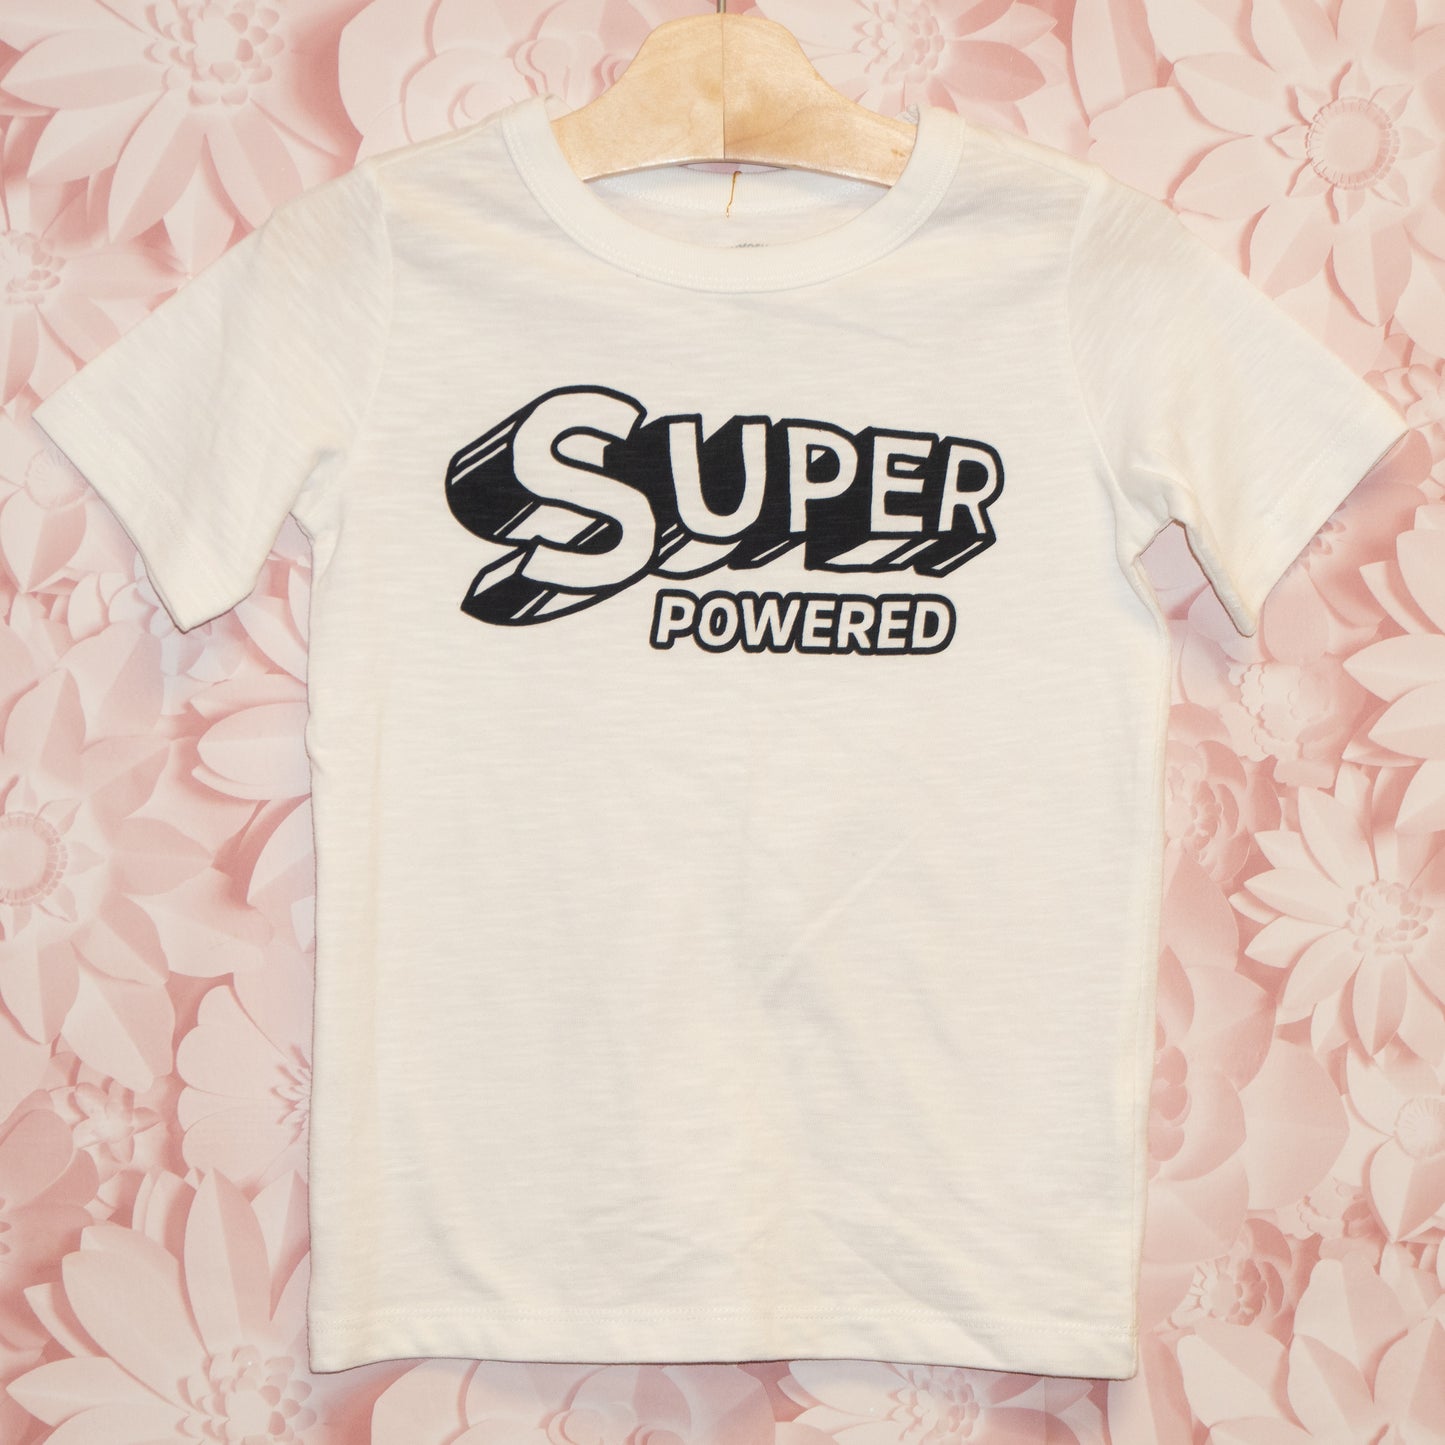 Super Powered Tee Size 4/5